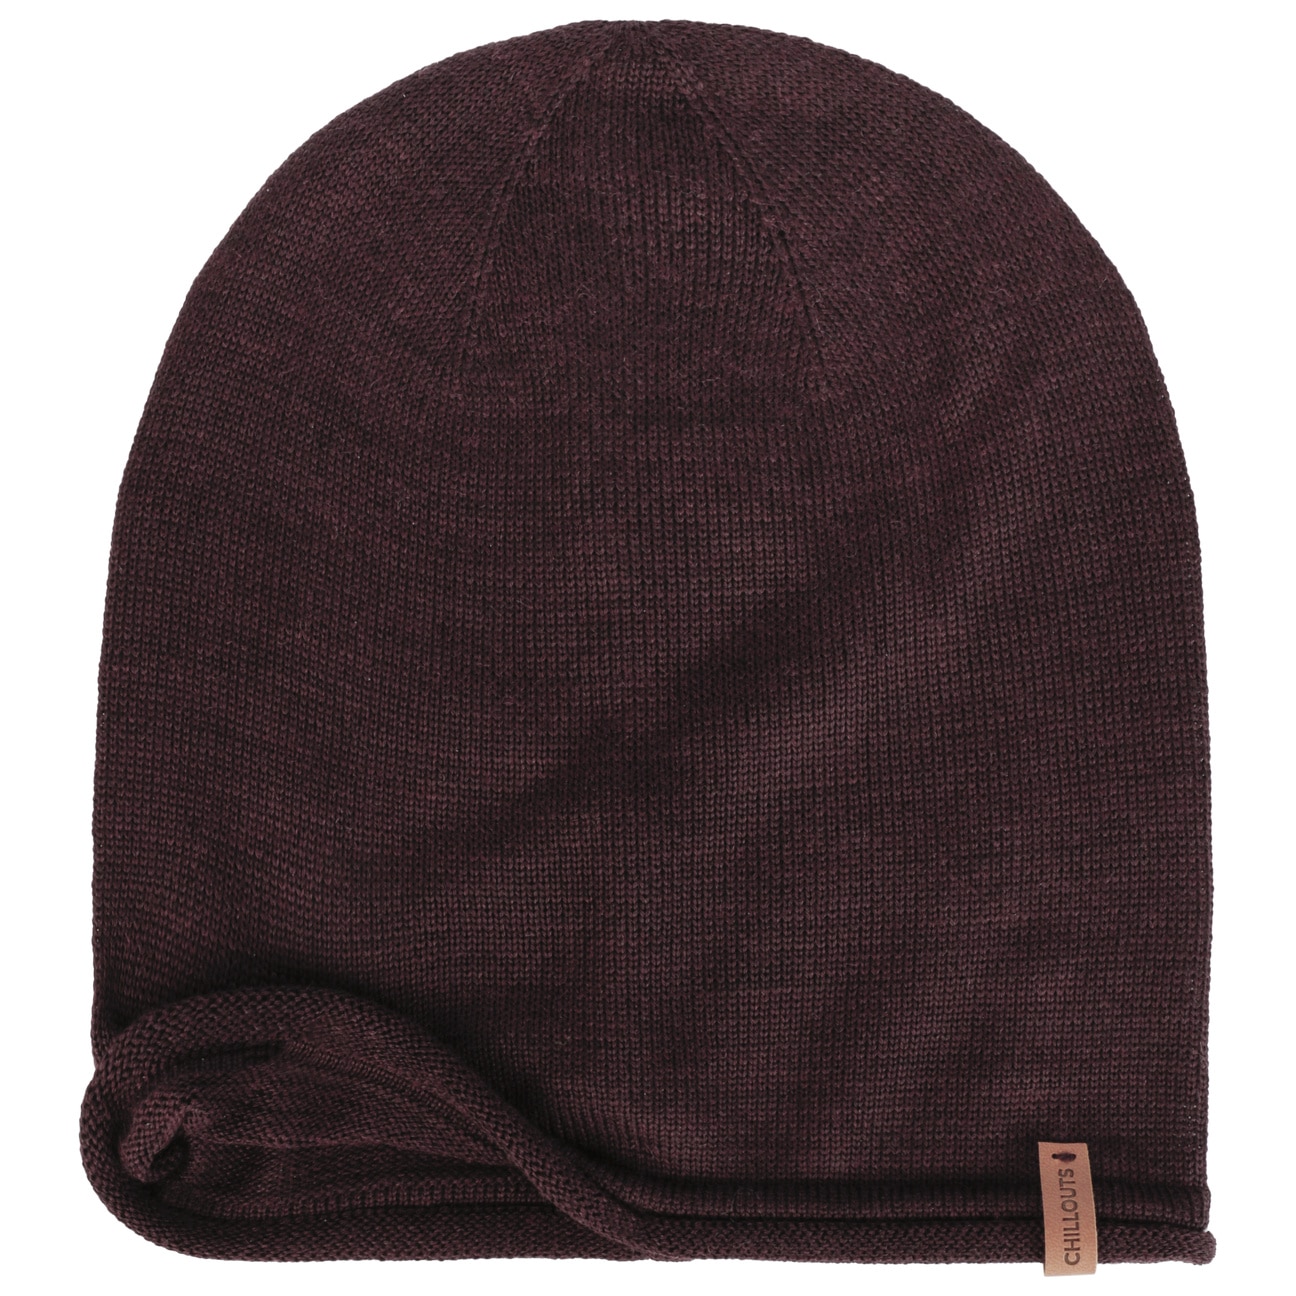 Berretto Beanie Leicester by Chillouts 27,99 - €